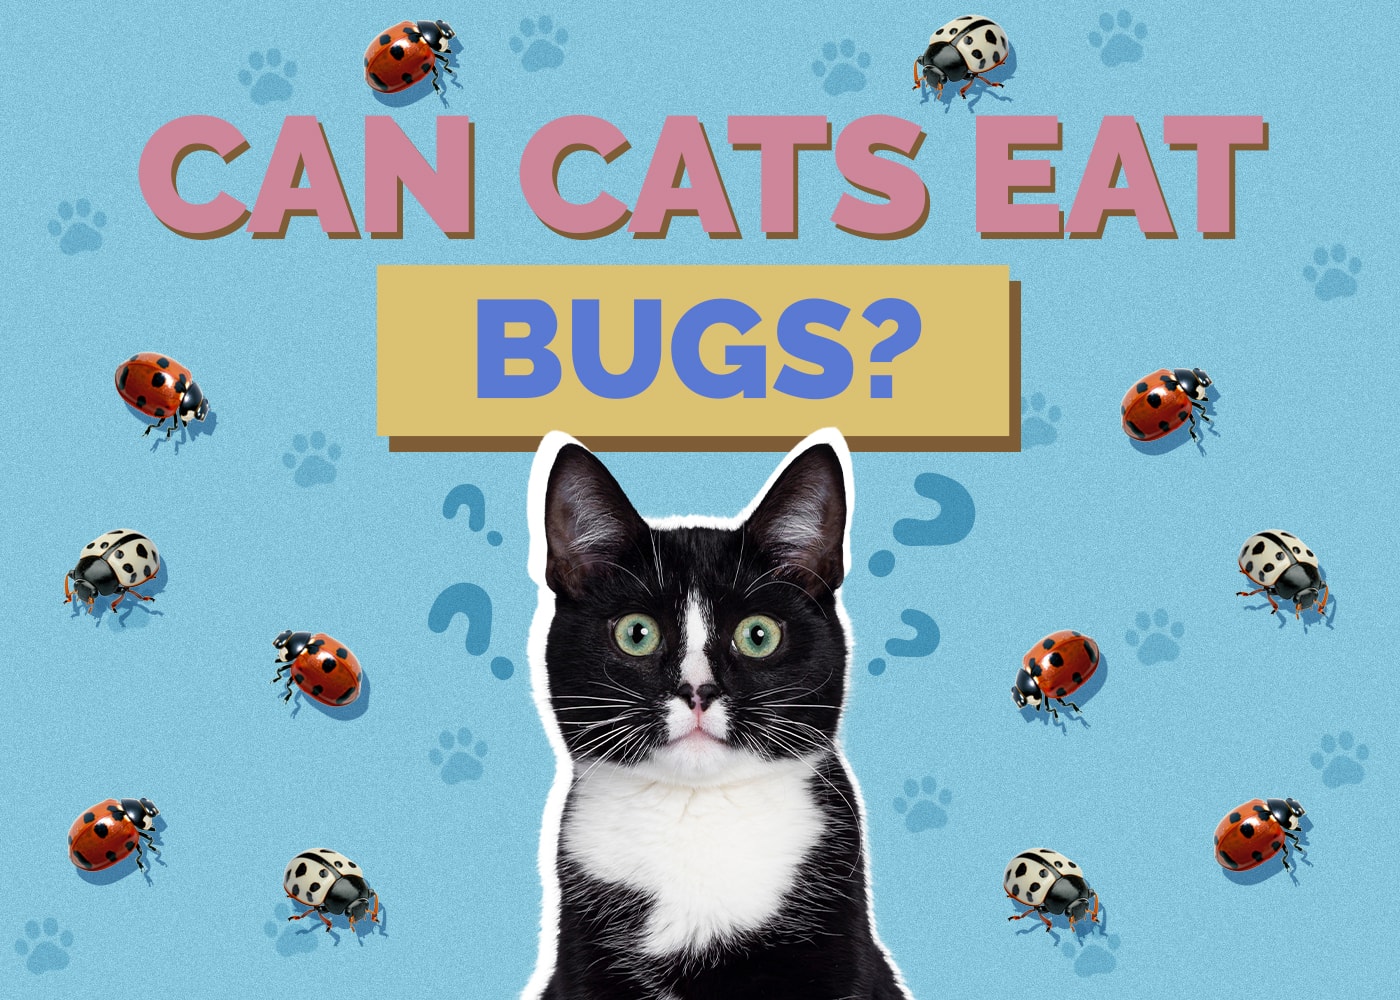 Can Cats Eat bugs